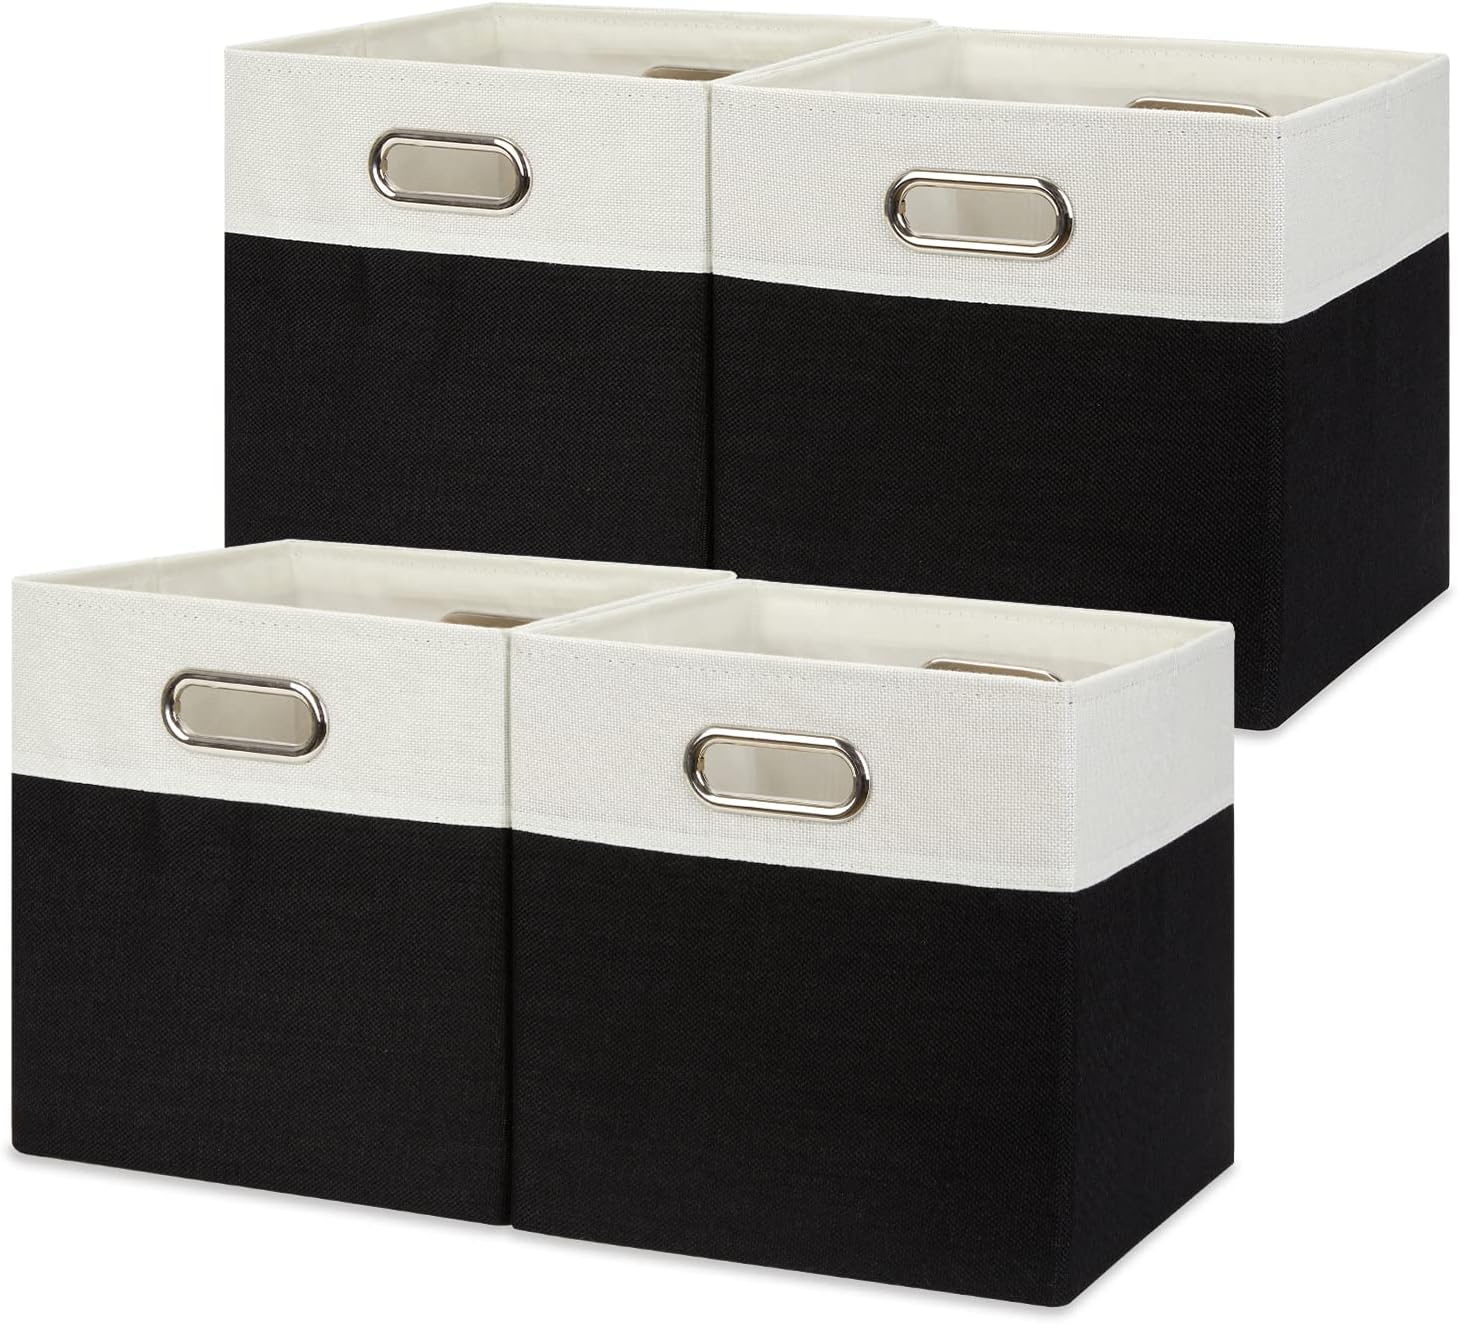 Temary Collapsible Storage Bins for Shelves 11 Inch Cube Storage Bins Small Storage Baskets for Organizing Fabric Organization Baskets with Handles for Closet Home Office(White&Black)